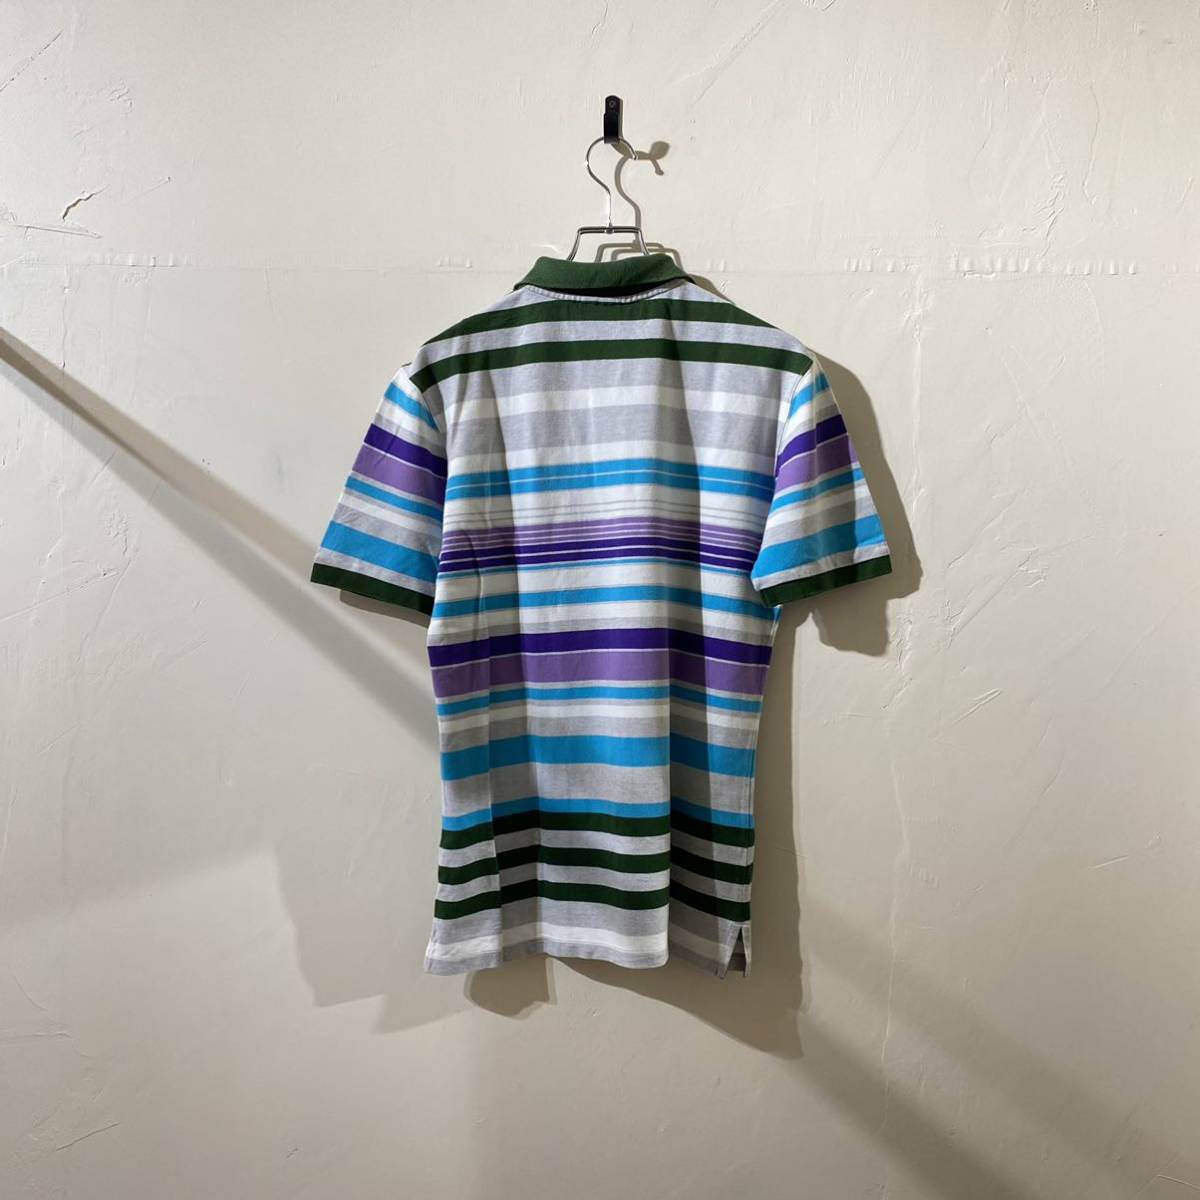 vintage euro boarder polo shirt ヨーロッパ古着 ビンテージ ポロシャツ ボーダーポロシャツ ボーダー柄 80s 90s_画像8